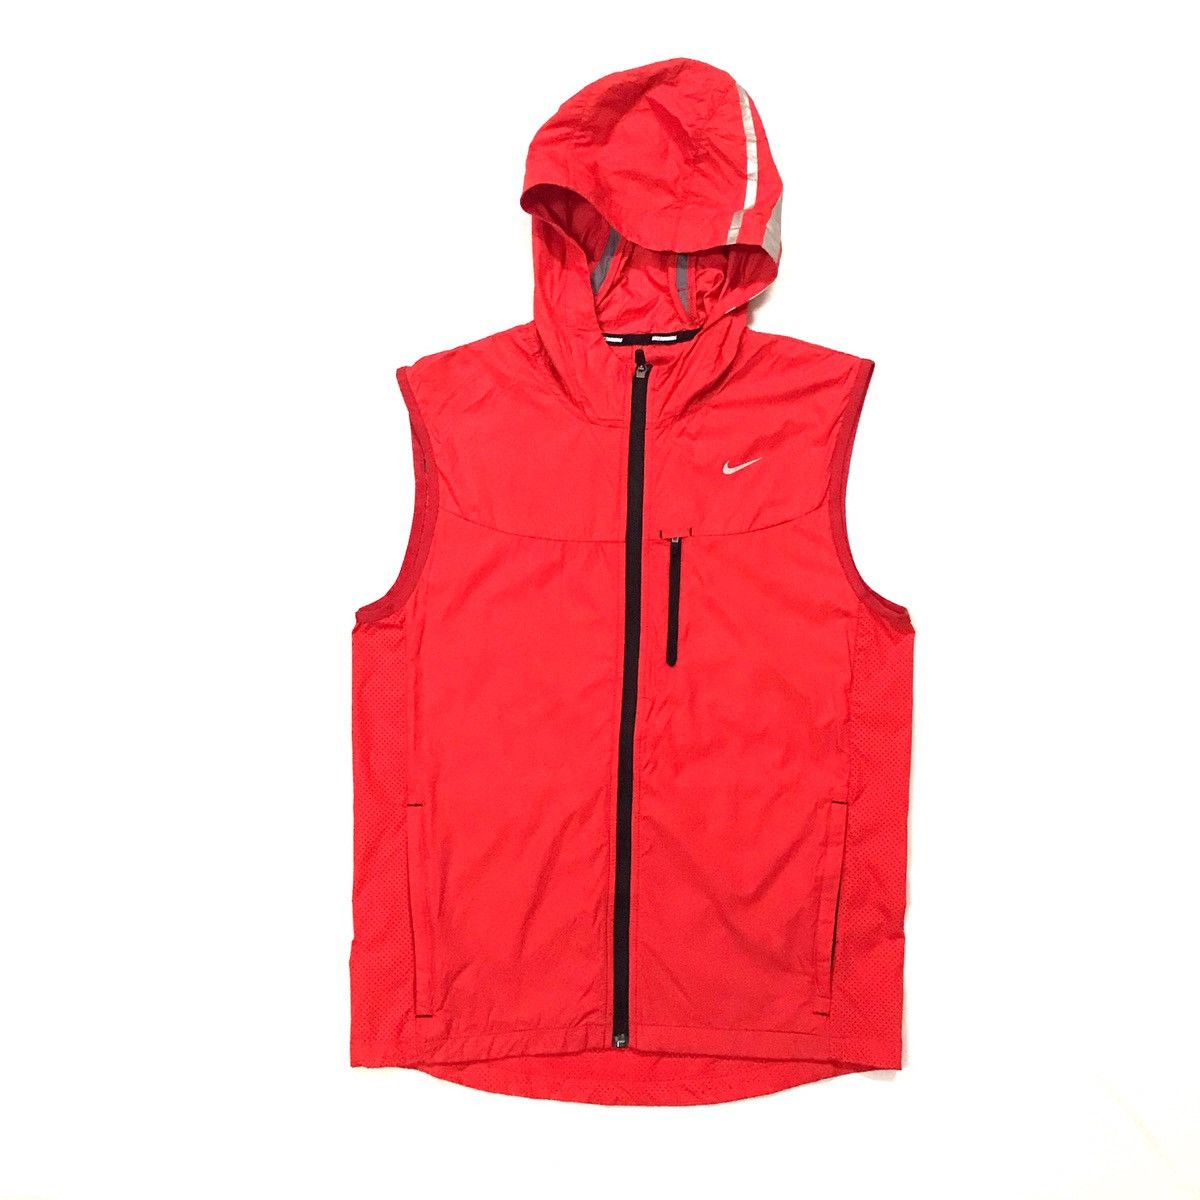 Nike Nike running vest hoodie Size US M / EU 48-50 / 2 - 1 Preview